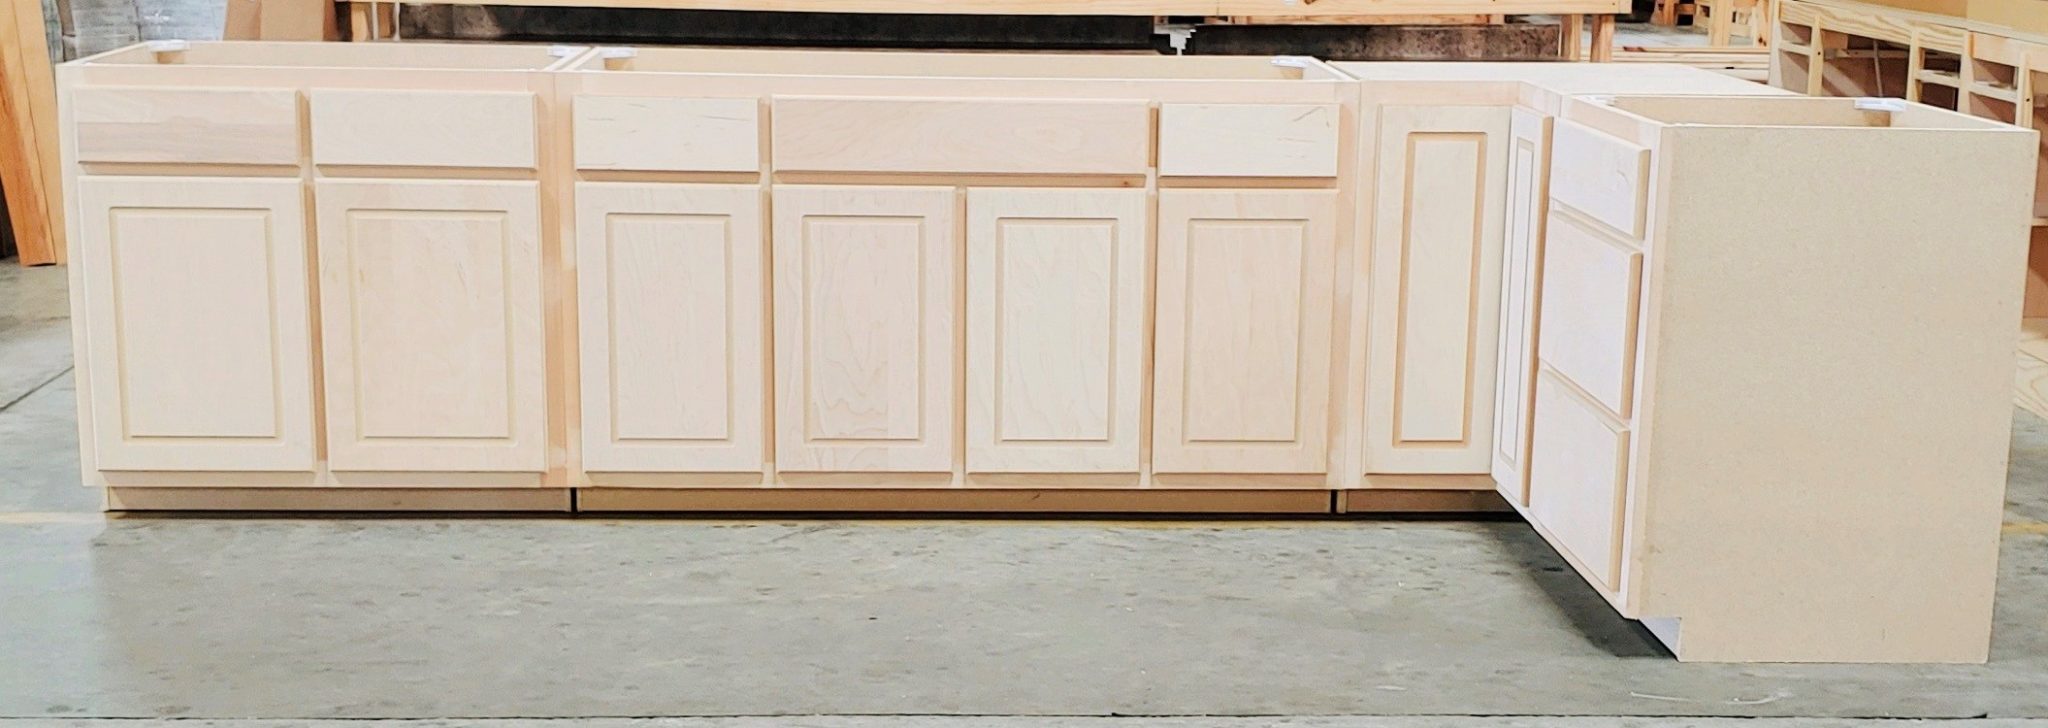 unfinished-kitchen-cabinets-builders-discount-center-of-1